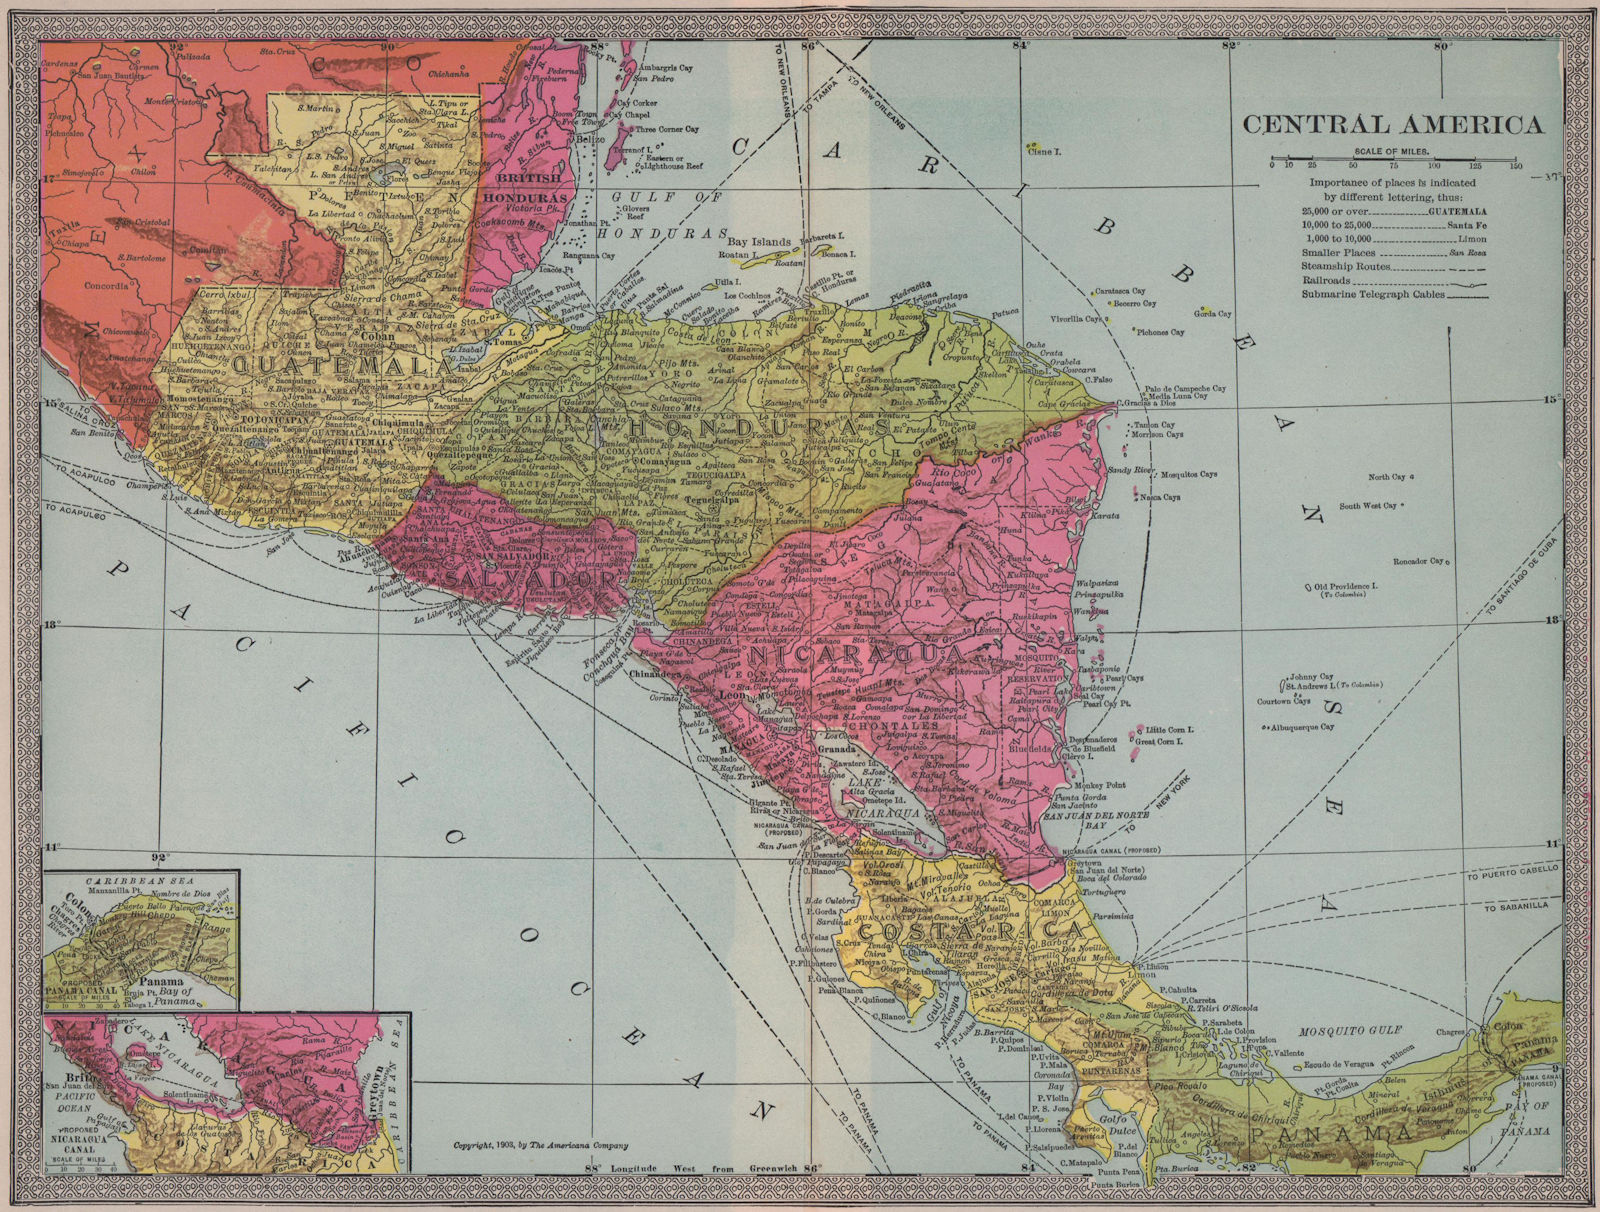 Associate Product Central America: Inset Maps of Panama; Brito. Central America 1903 old